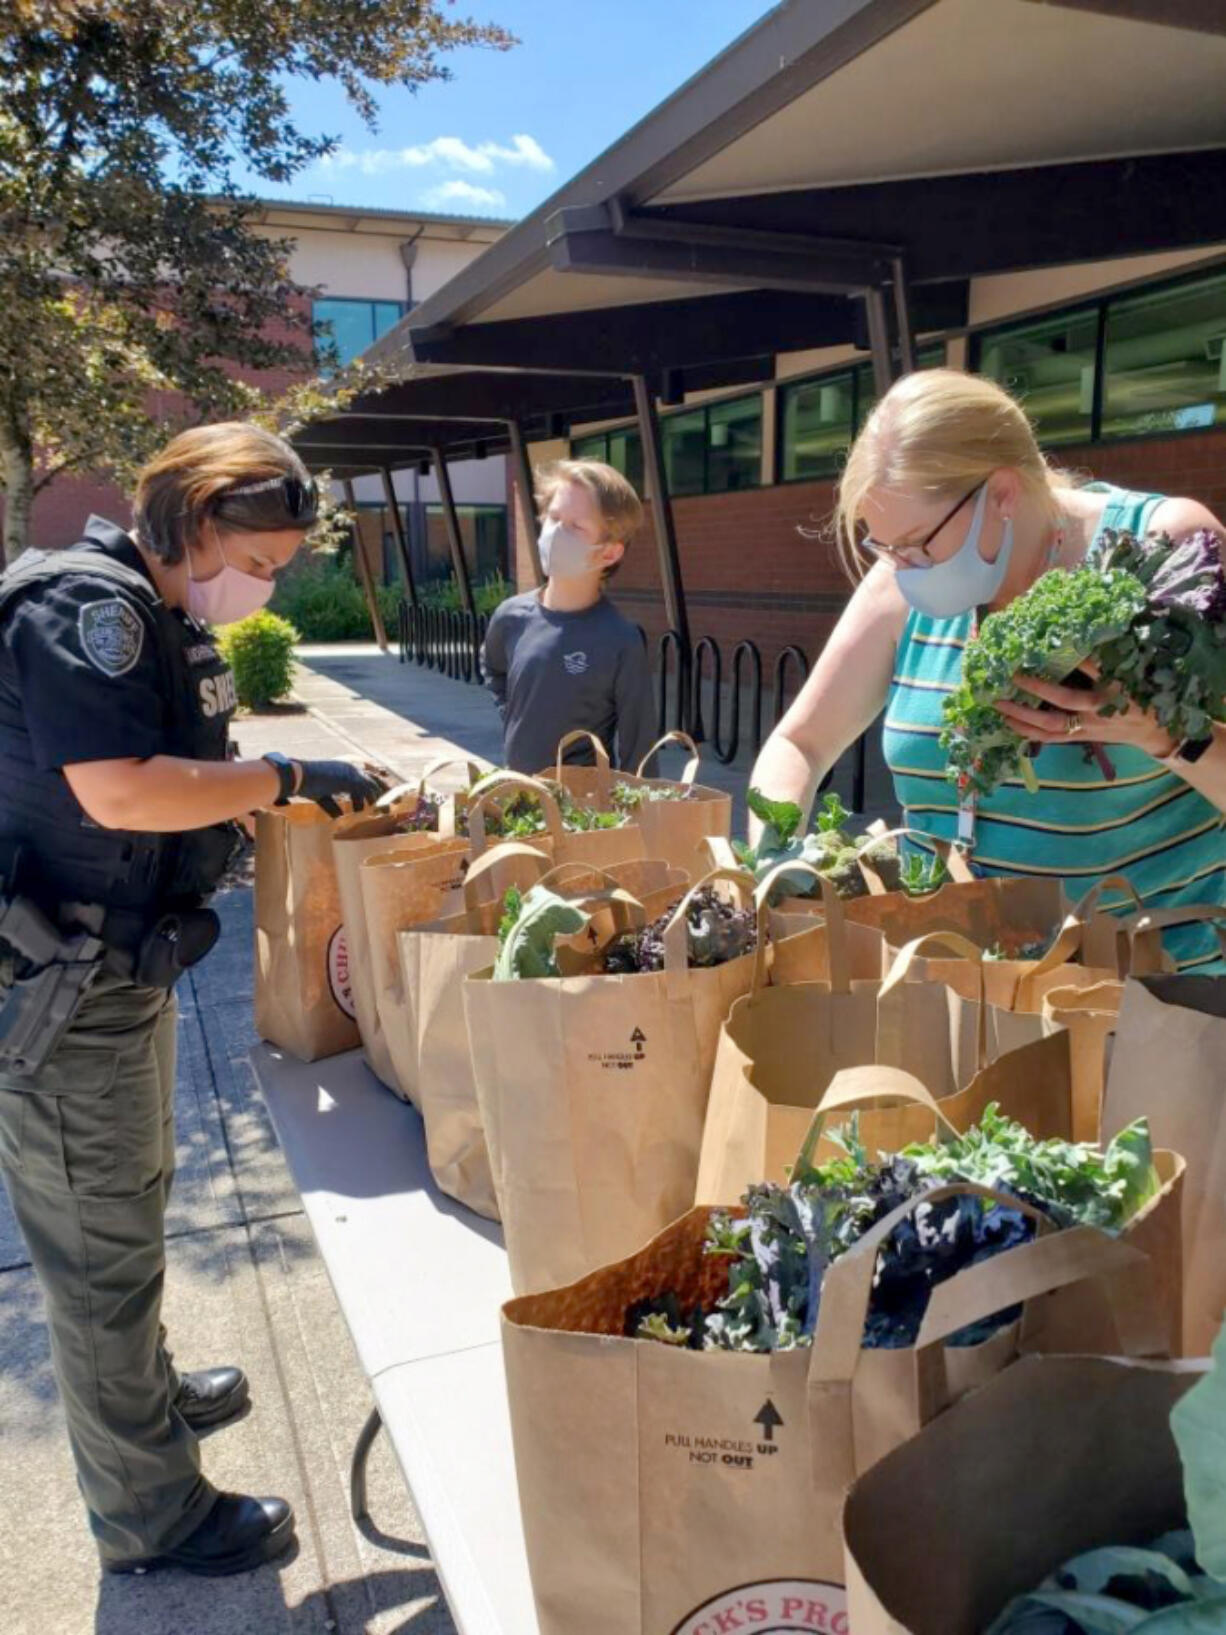 Deputy Amanda Nohrenberg from the Clark County Sheriff's Office, left, volunteers at a fresh food distribution.